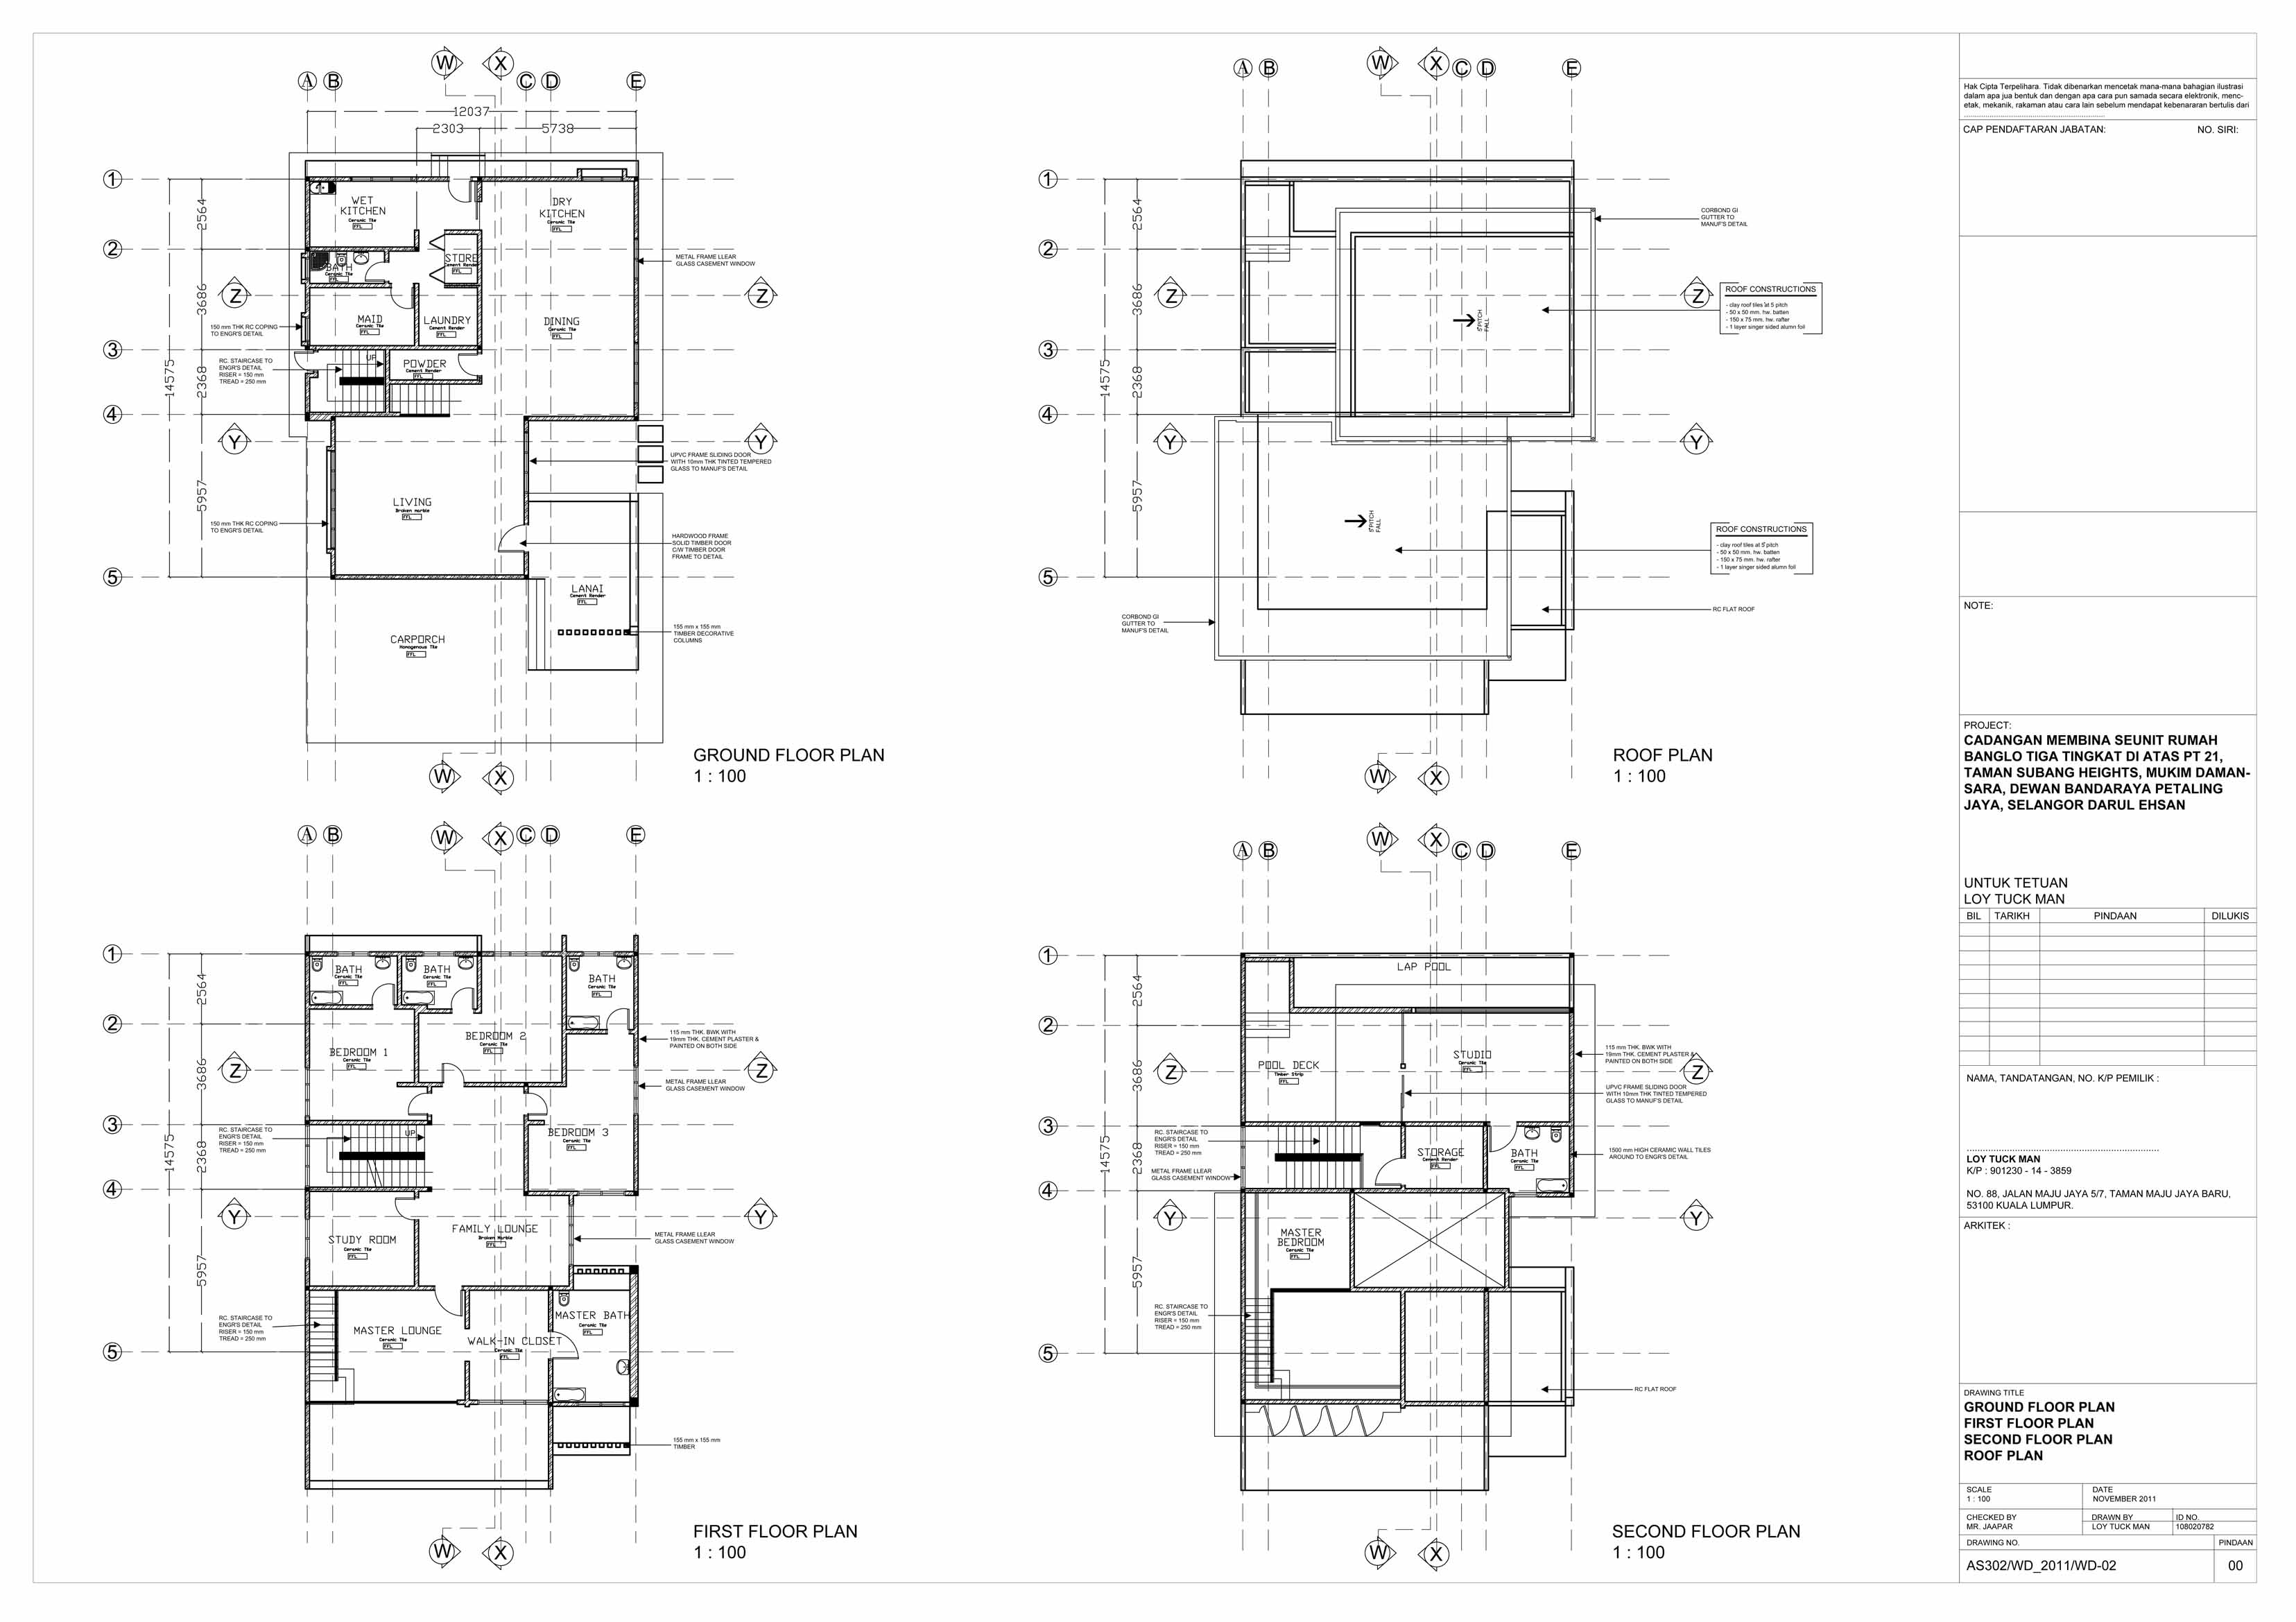 Architectural Drawing - Aims, types and components | Dassault Systèmes